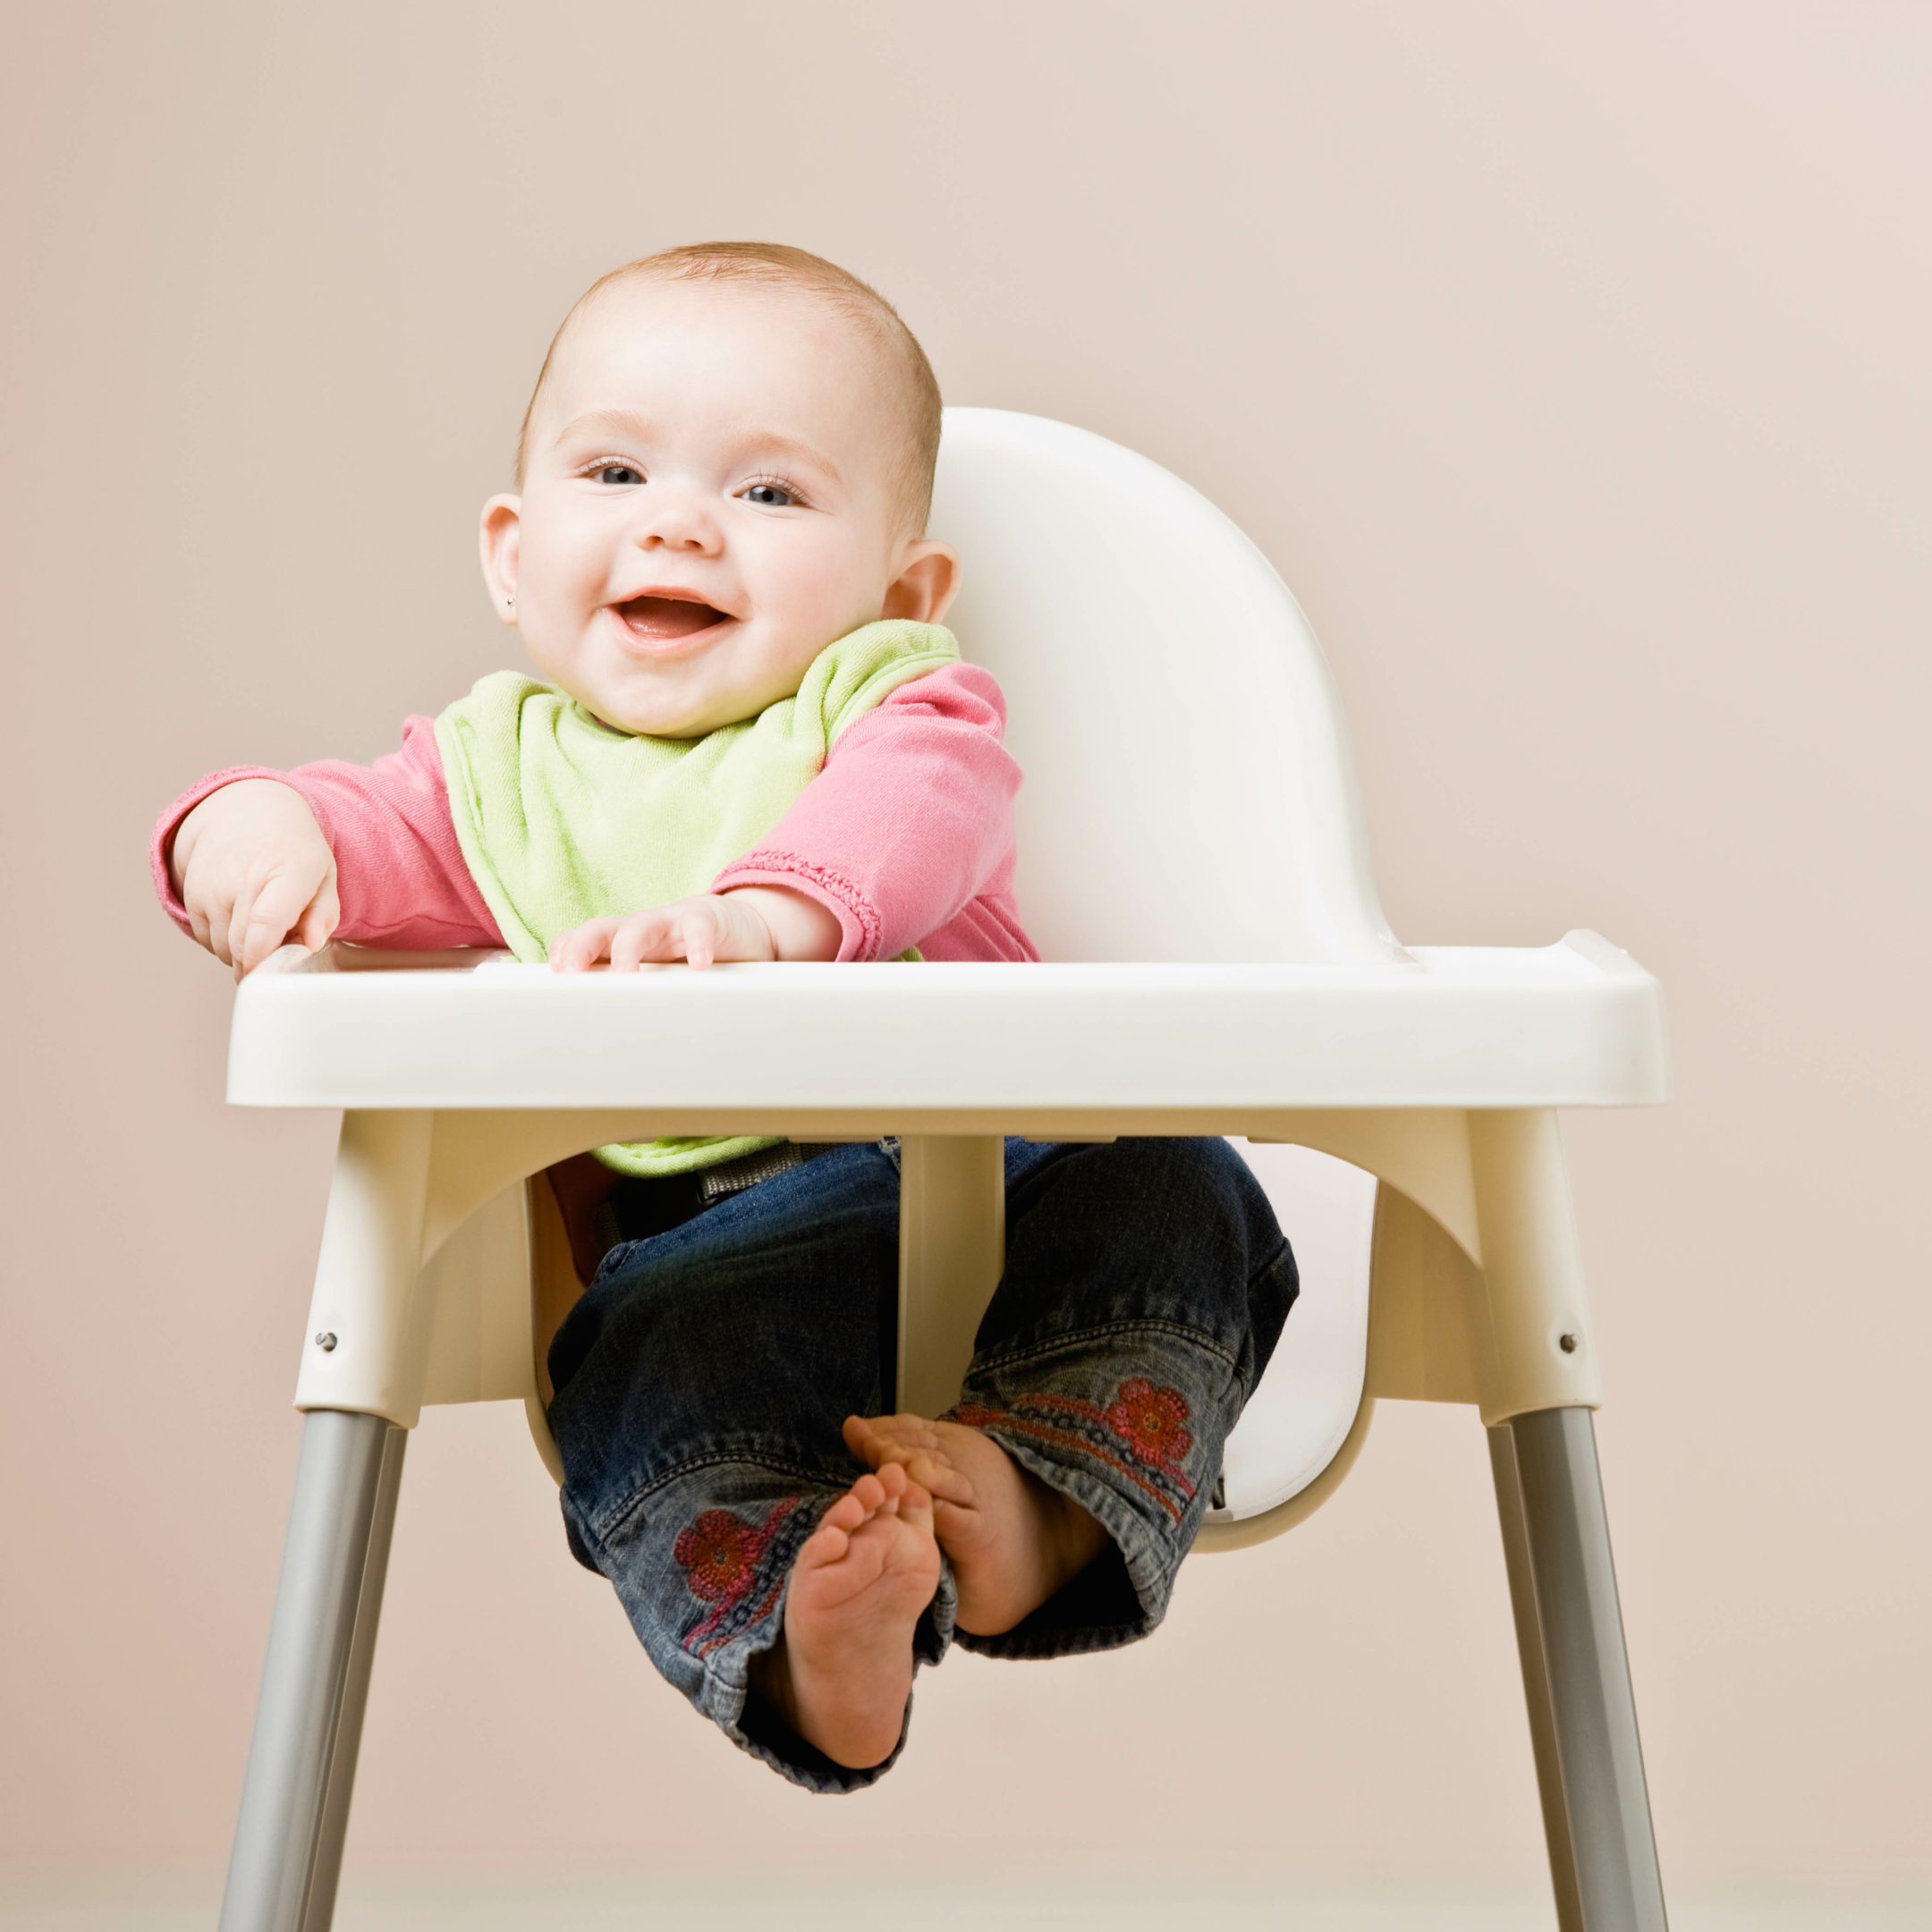 How to make baby sit in high chair